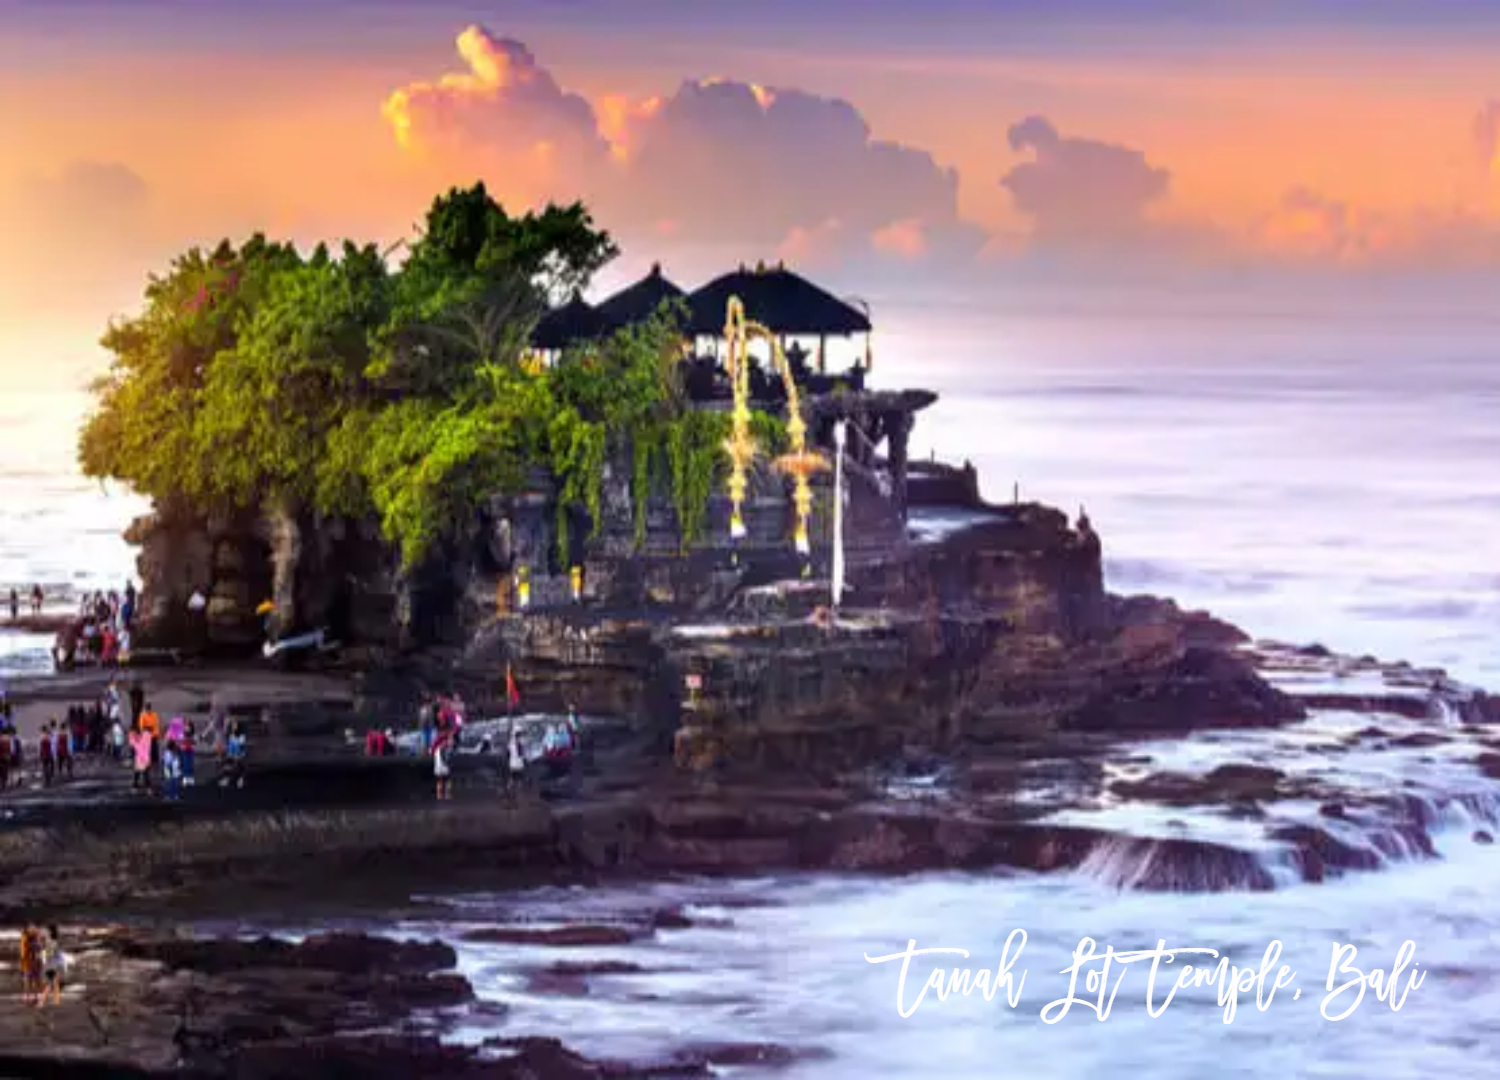 tanah lot temple bali, best places to visit in bali, top 20 places to visit in bali, bali tourist places, jodhpur cabs,